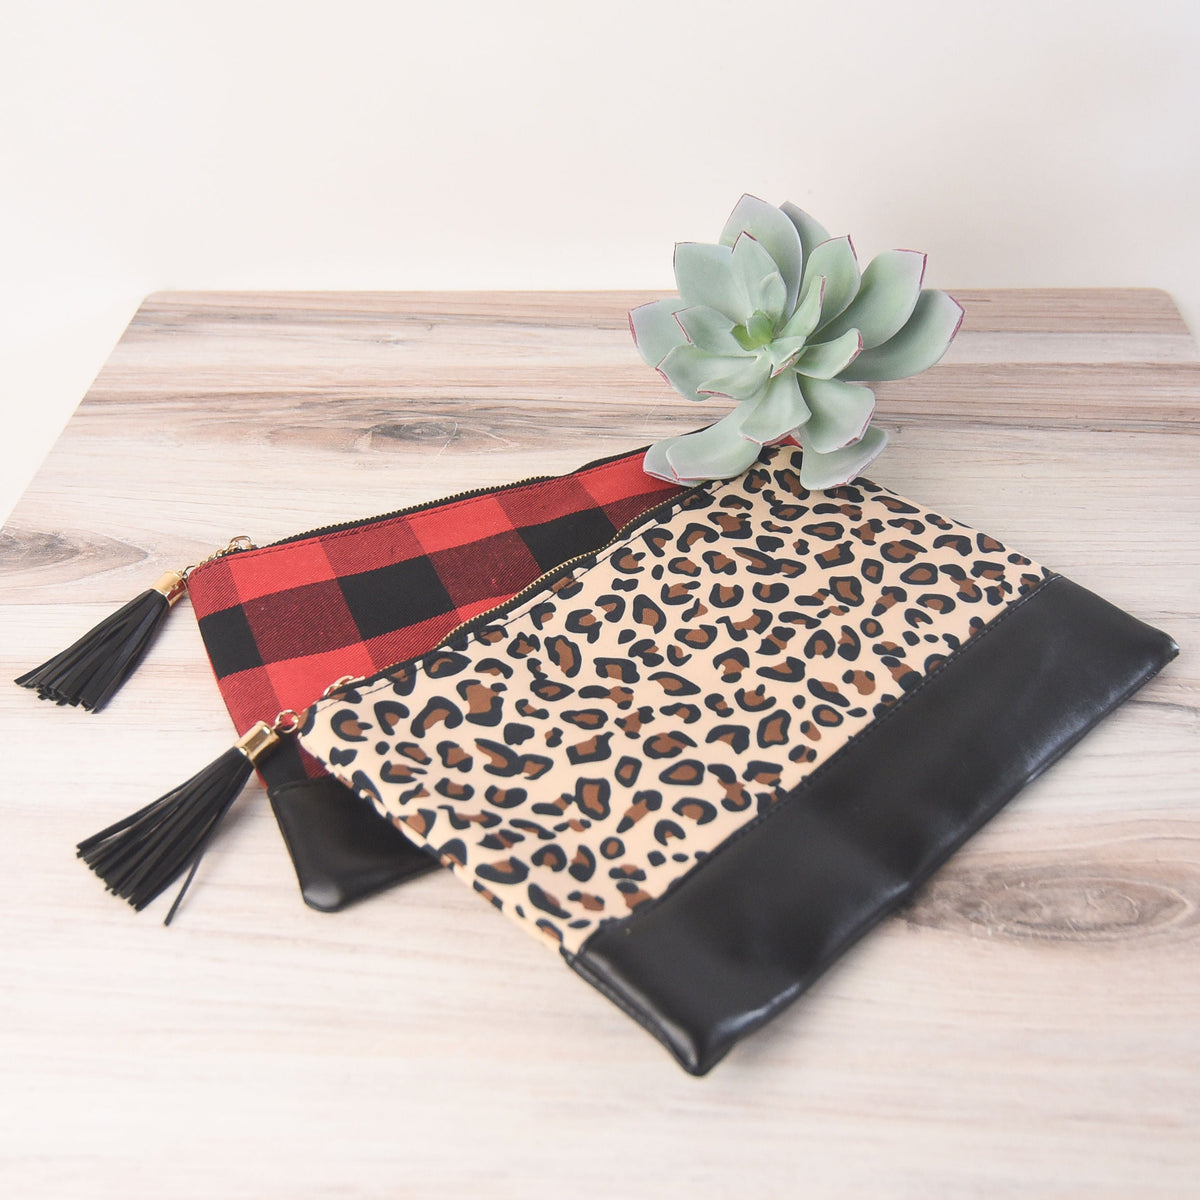 Red and Black Buffalo Check Zip Clutch-Clutch-Lemons and Limes Boutique